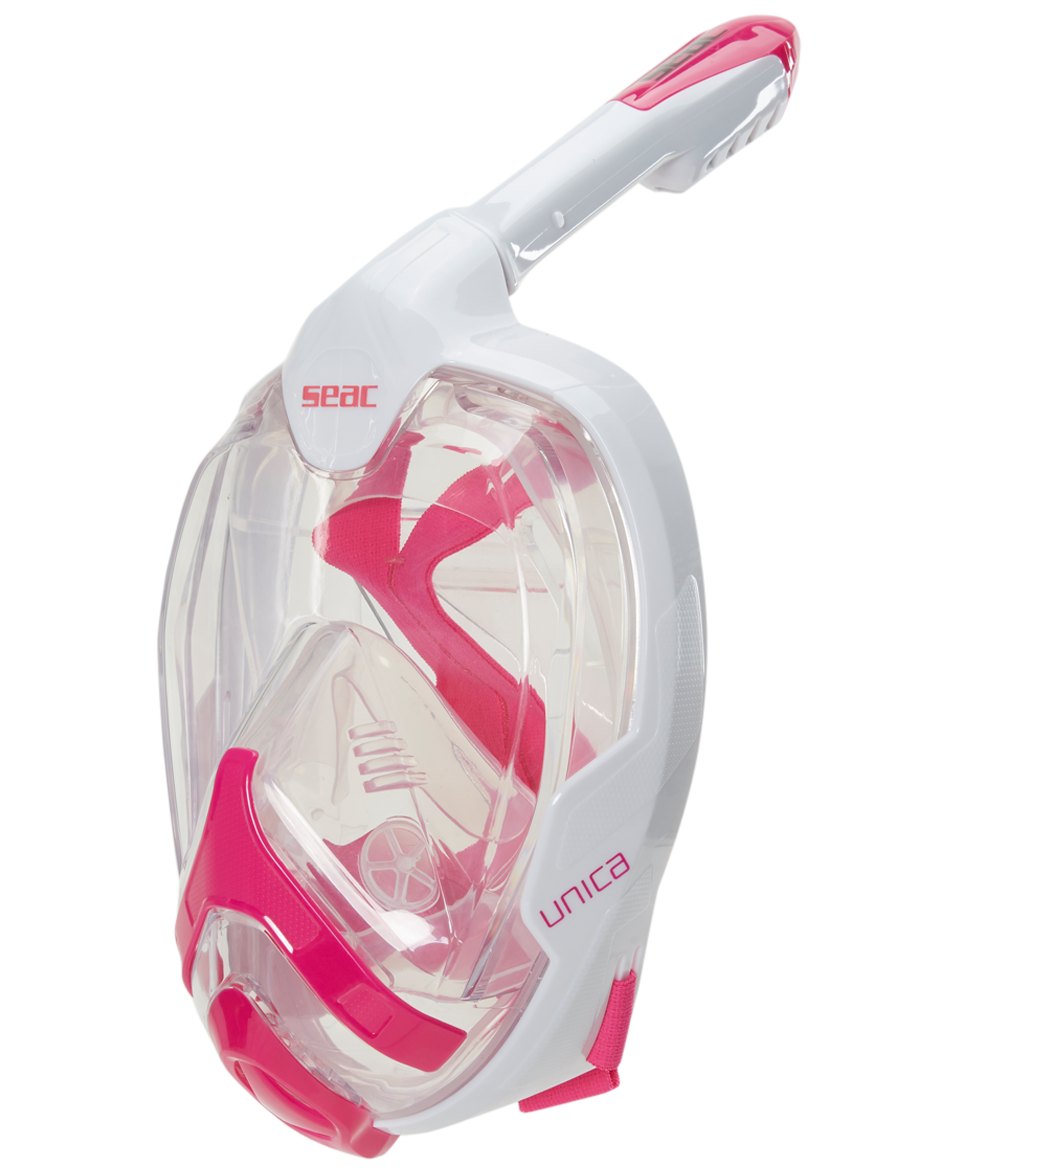 Seac Usa Unica Full Face Snorkeling Mask - White/Pink S/M Size Small/Medium - Swimoutlet.com